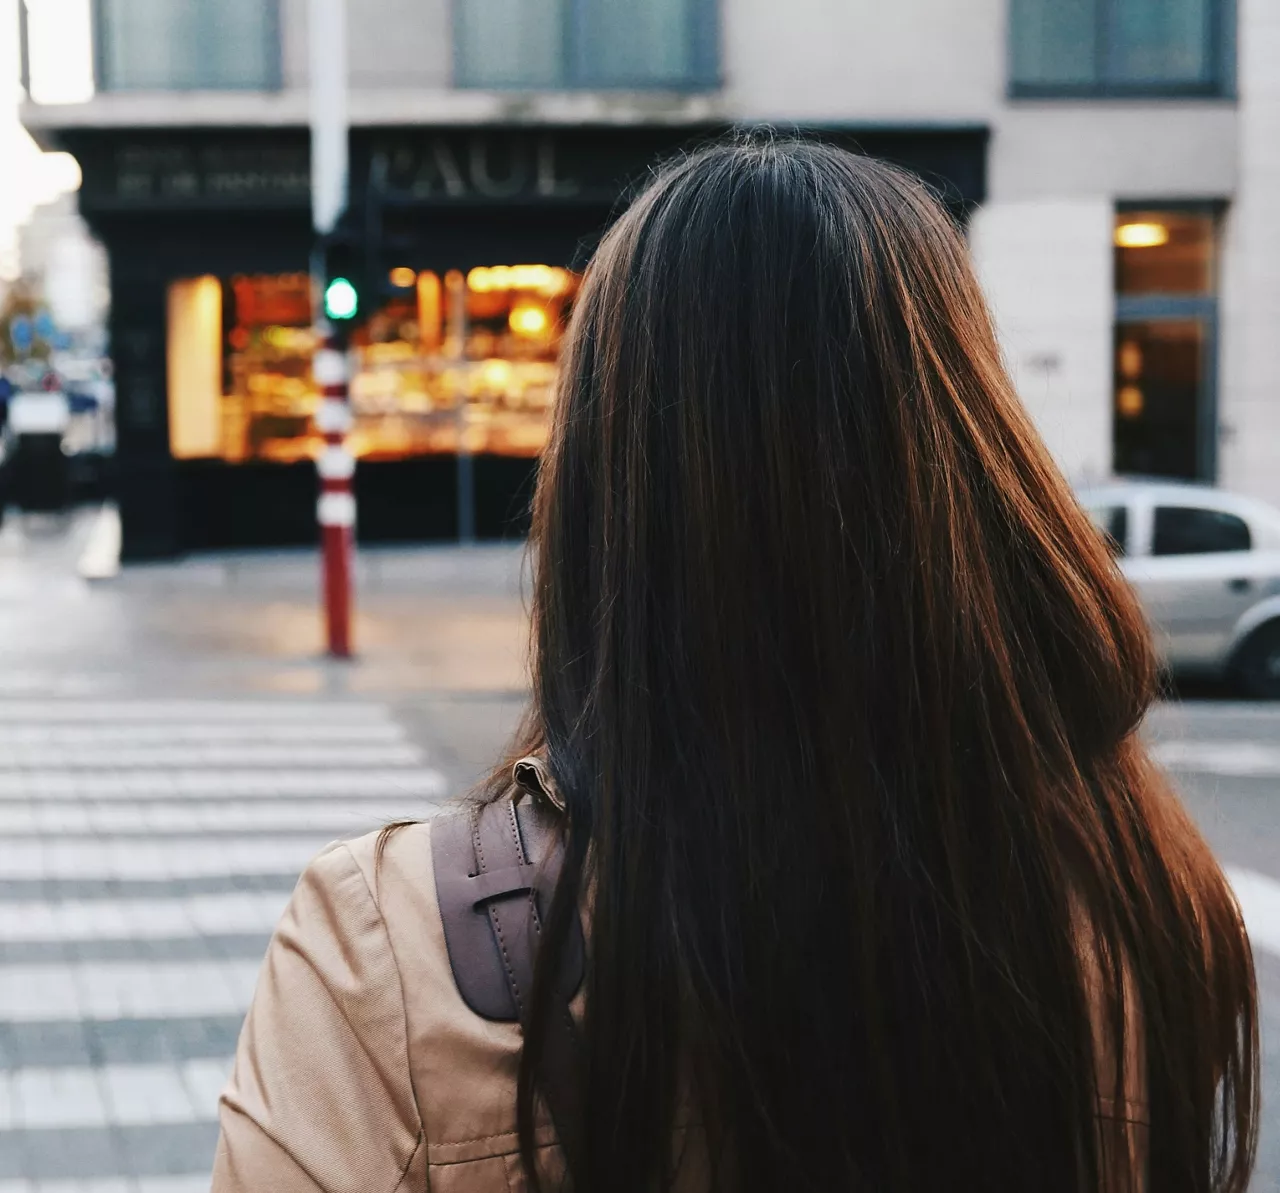 Woman with long brunette hair walk down street past retail stores